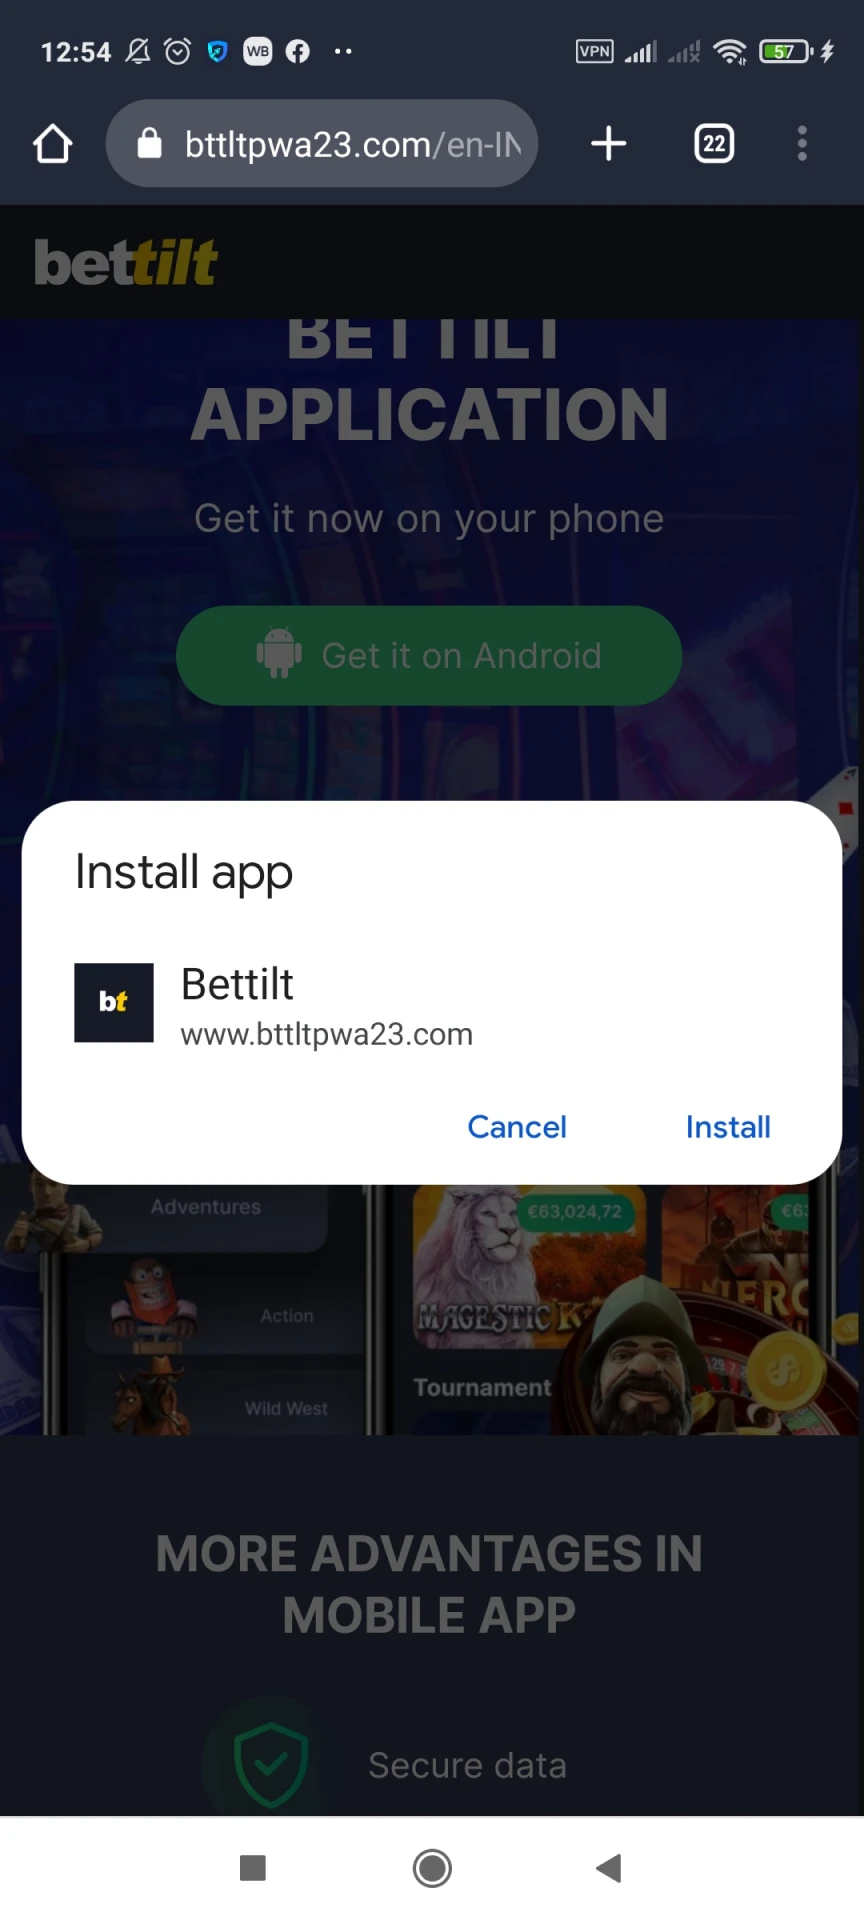 You need to start installing the Bettilt app for Android.